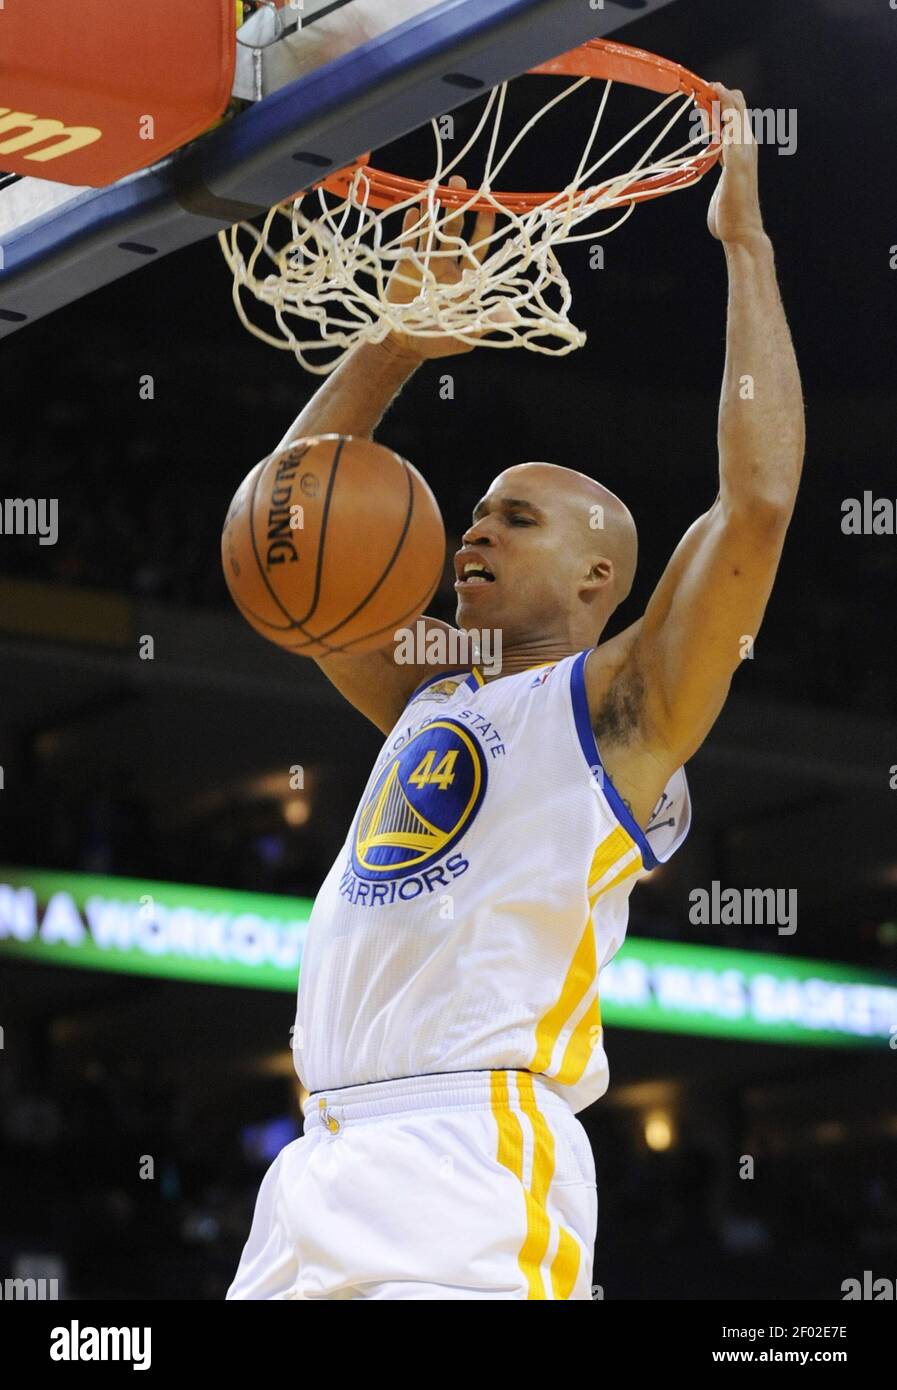 Golden State Warriors' Richard Jefferson (44) dunks against the Minnesota  Timberwolves in the second quarter of their game at Oracle Arena in  Oakland, California on Monday, March 19, 2012. (Photo by Jose